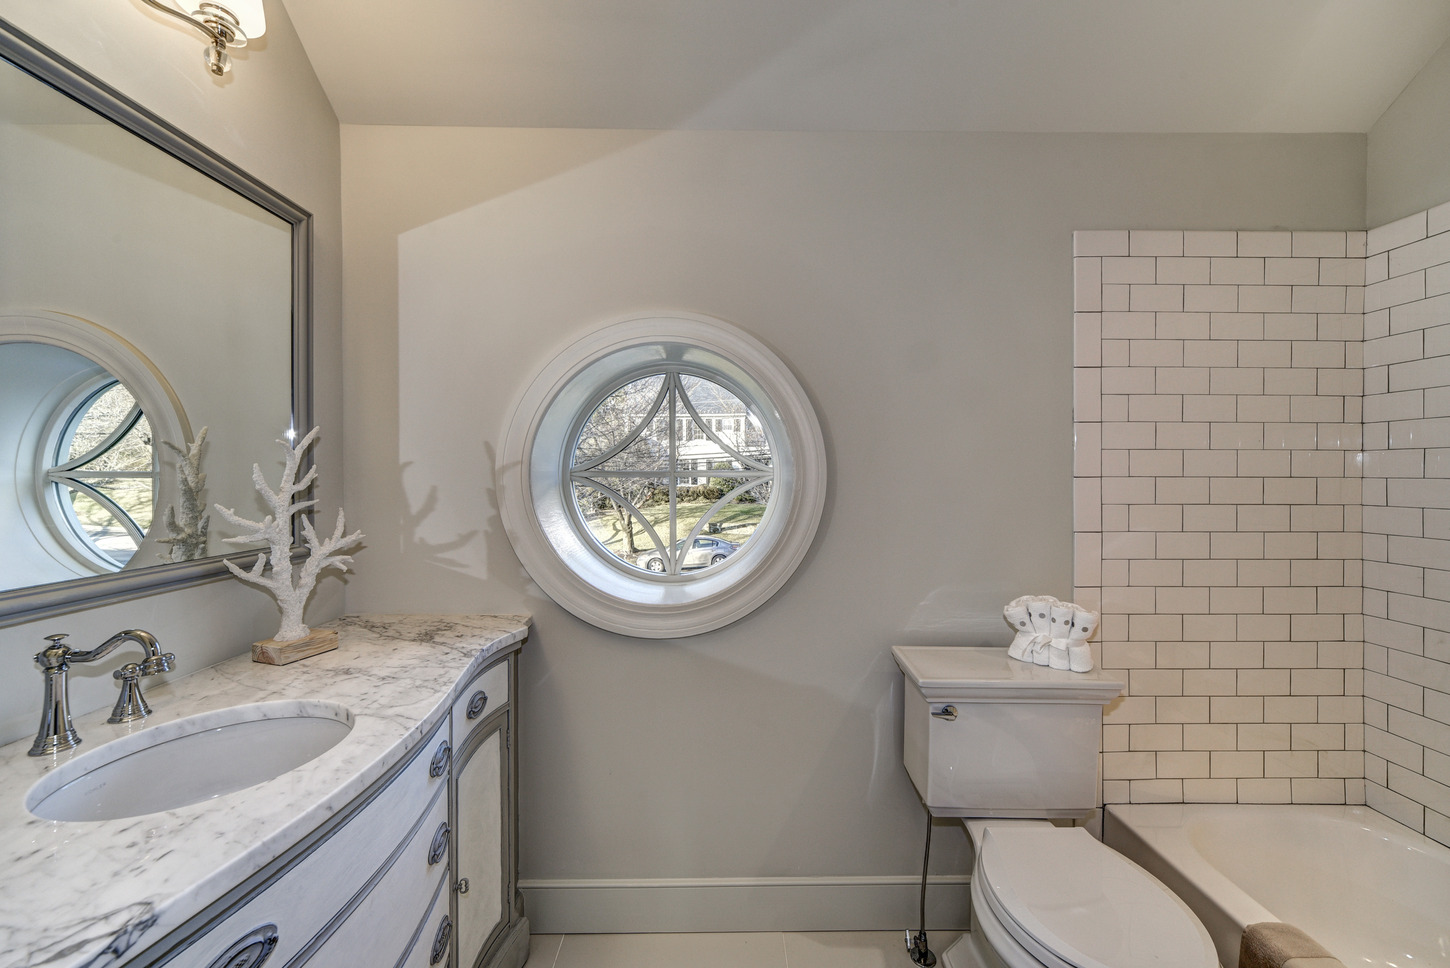 Modest-round-window-in-a-classic-white-bathroom-